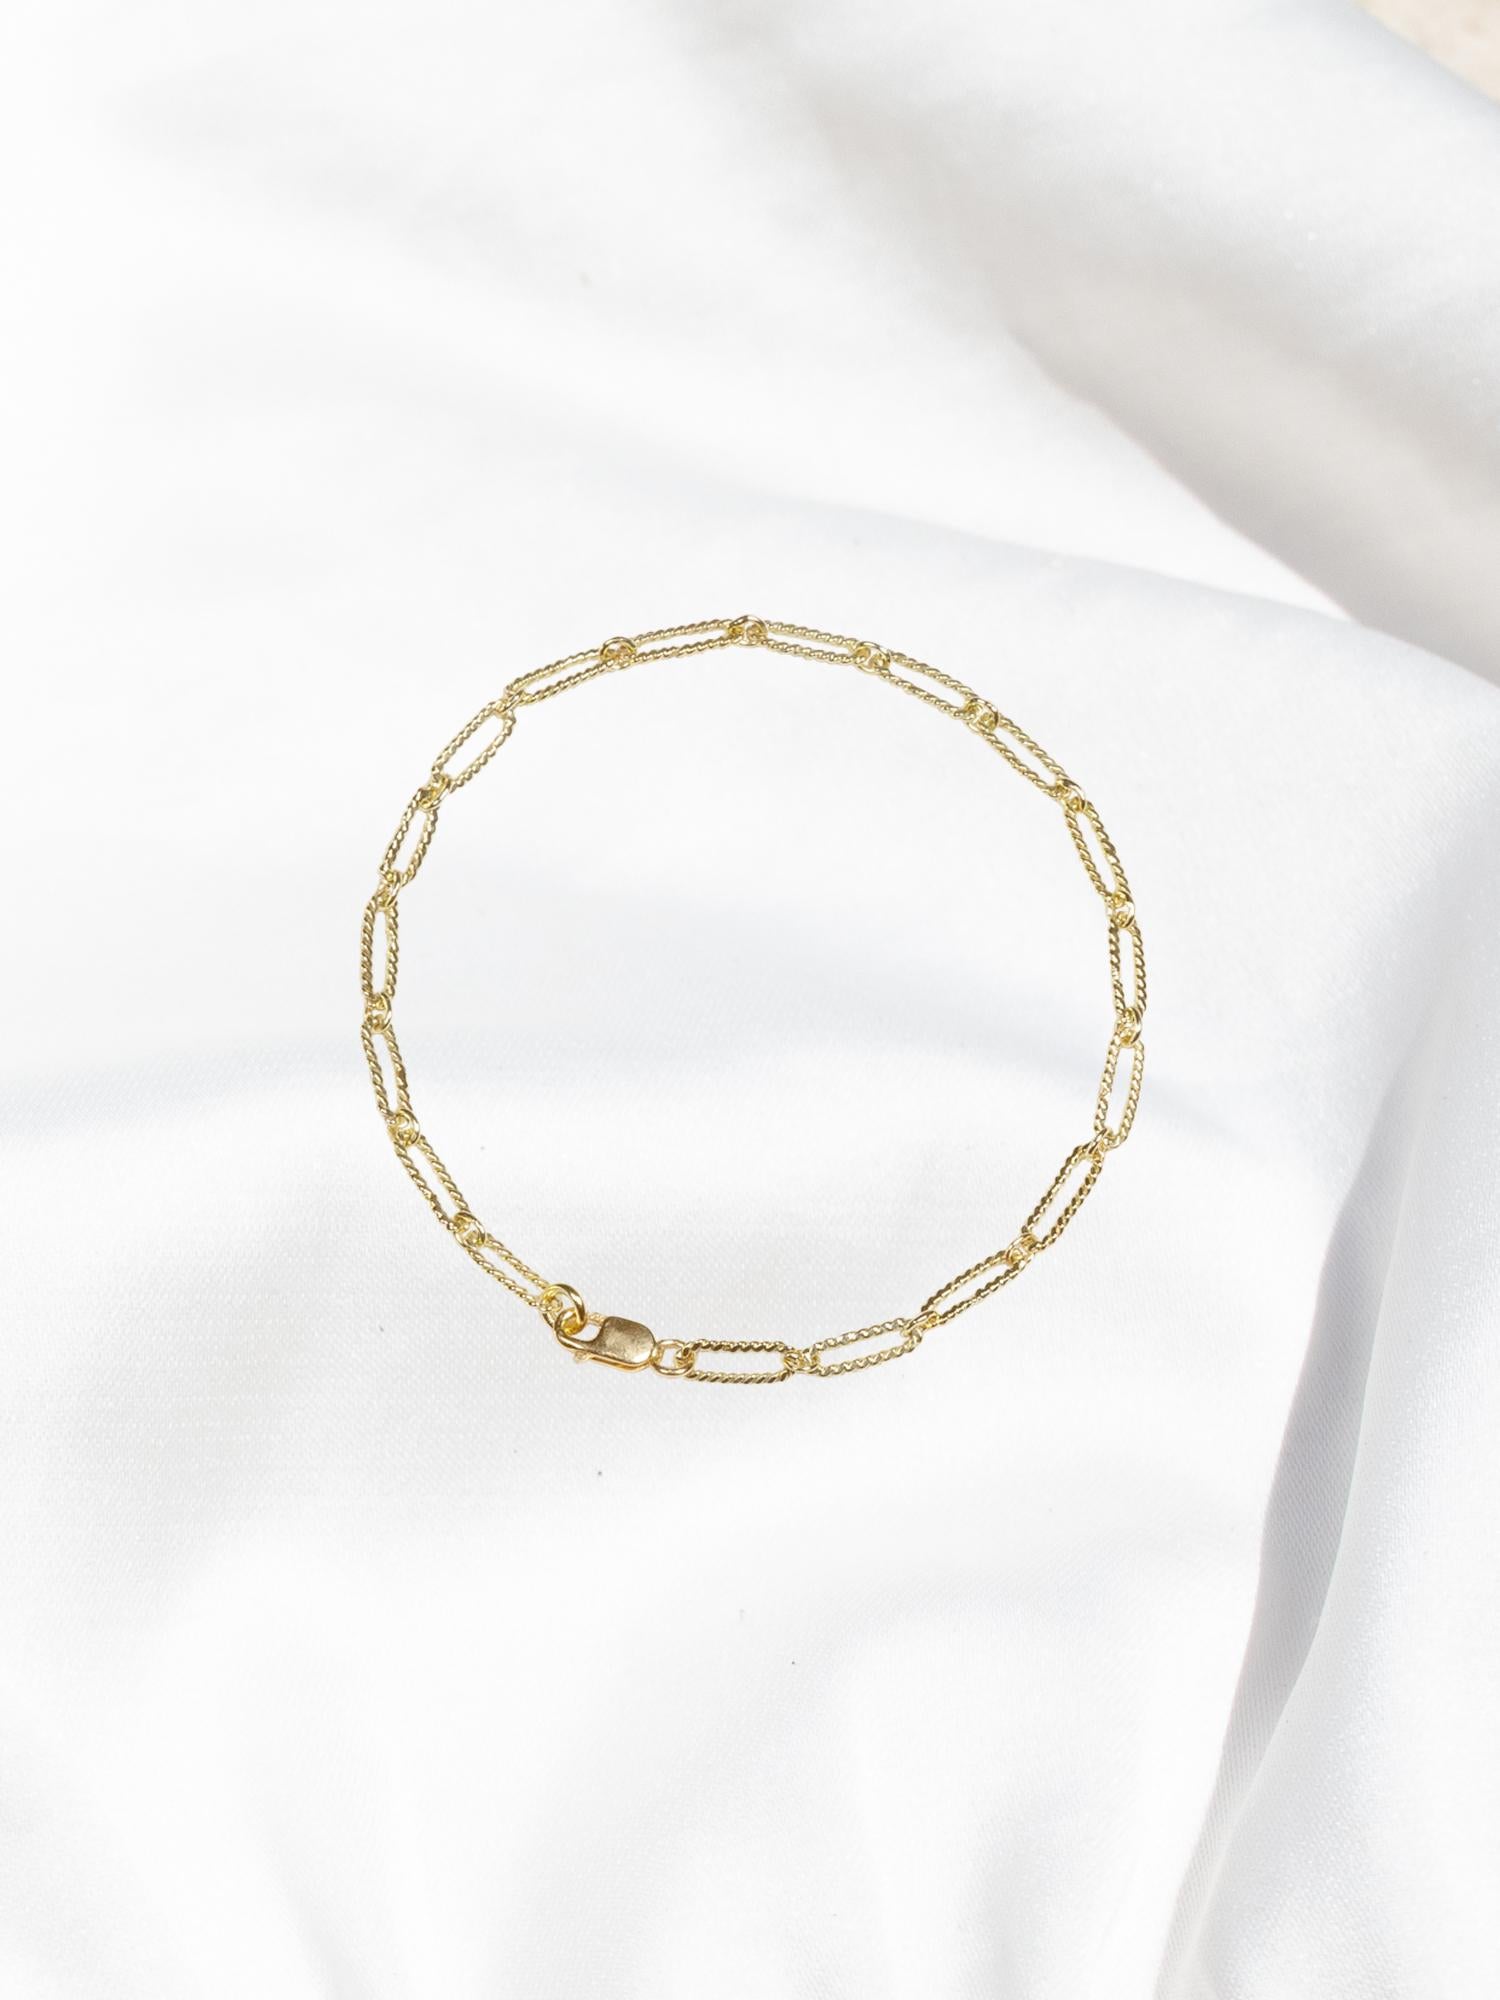 Part of our signature chain collection, the Olivia bracelet resembles the modern paperclip chain but with a twist. Literally. Crafted entirely by hand, our links are made in the traditional filigree method where gold wires are twisted together to